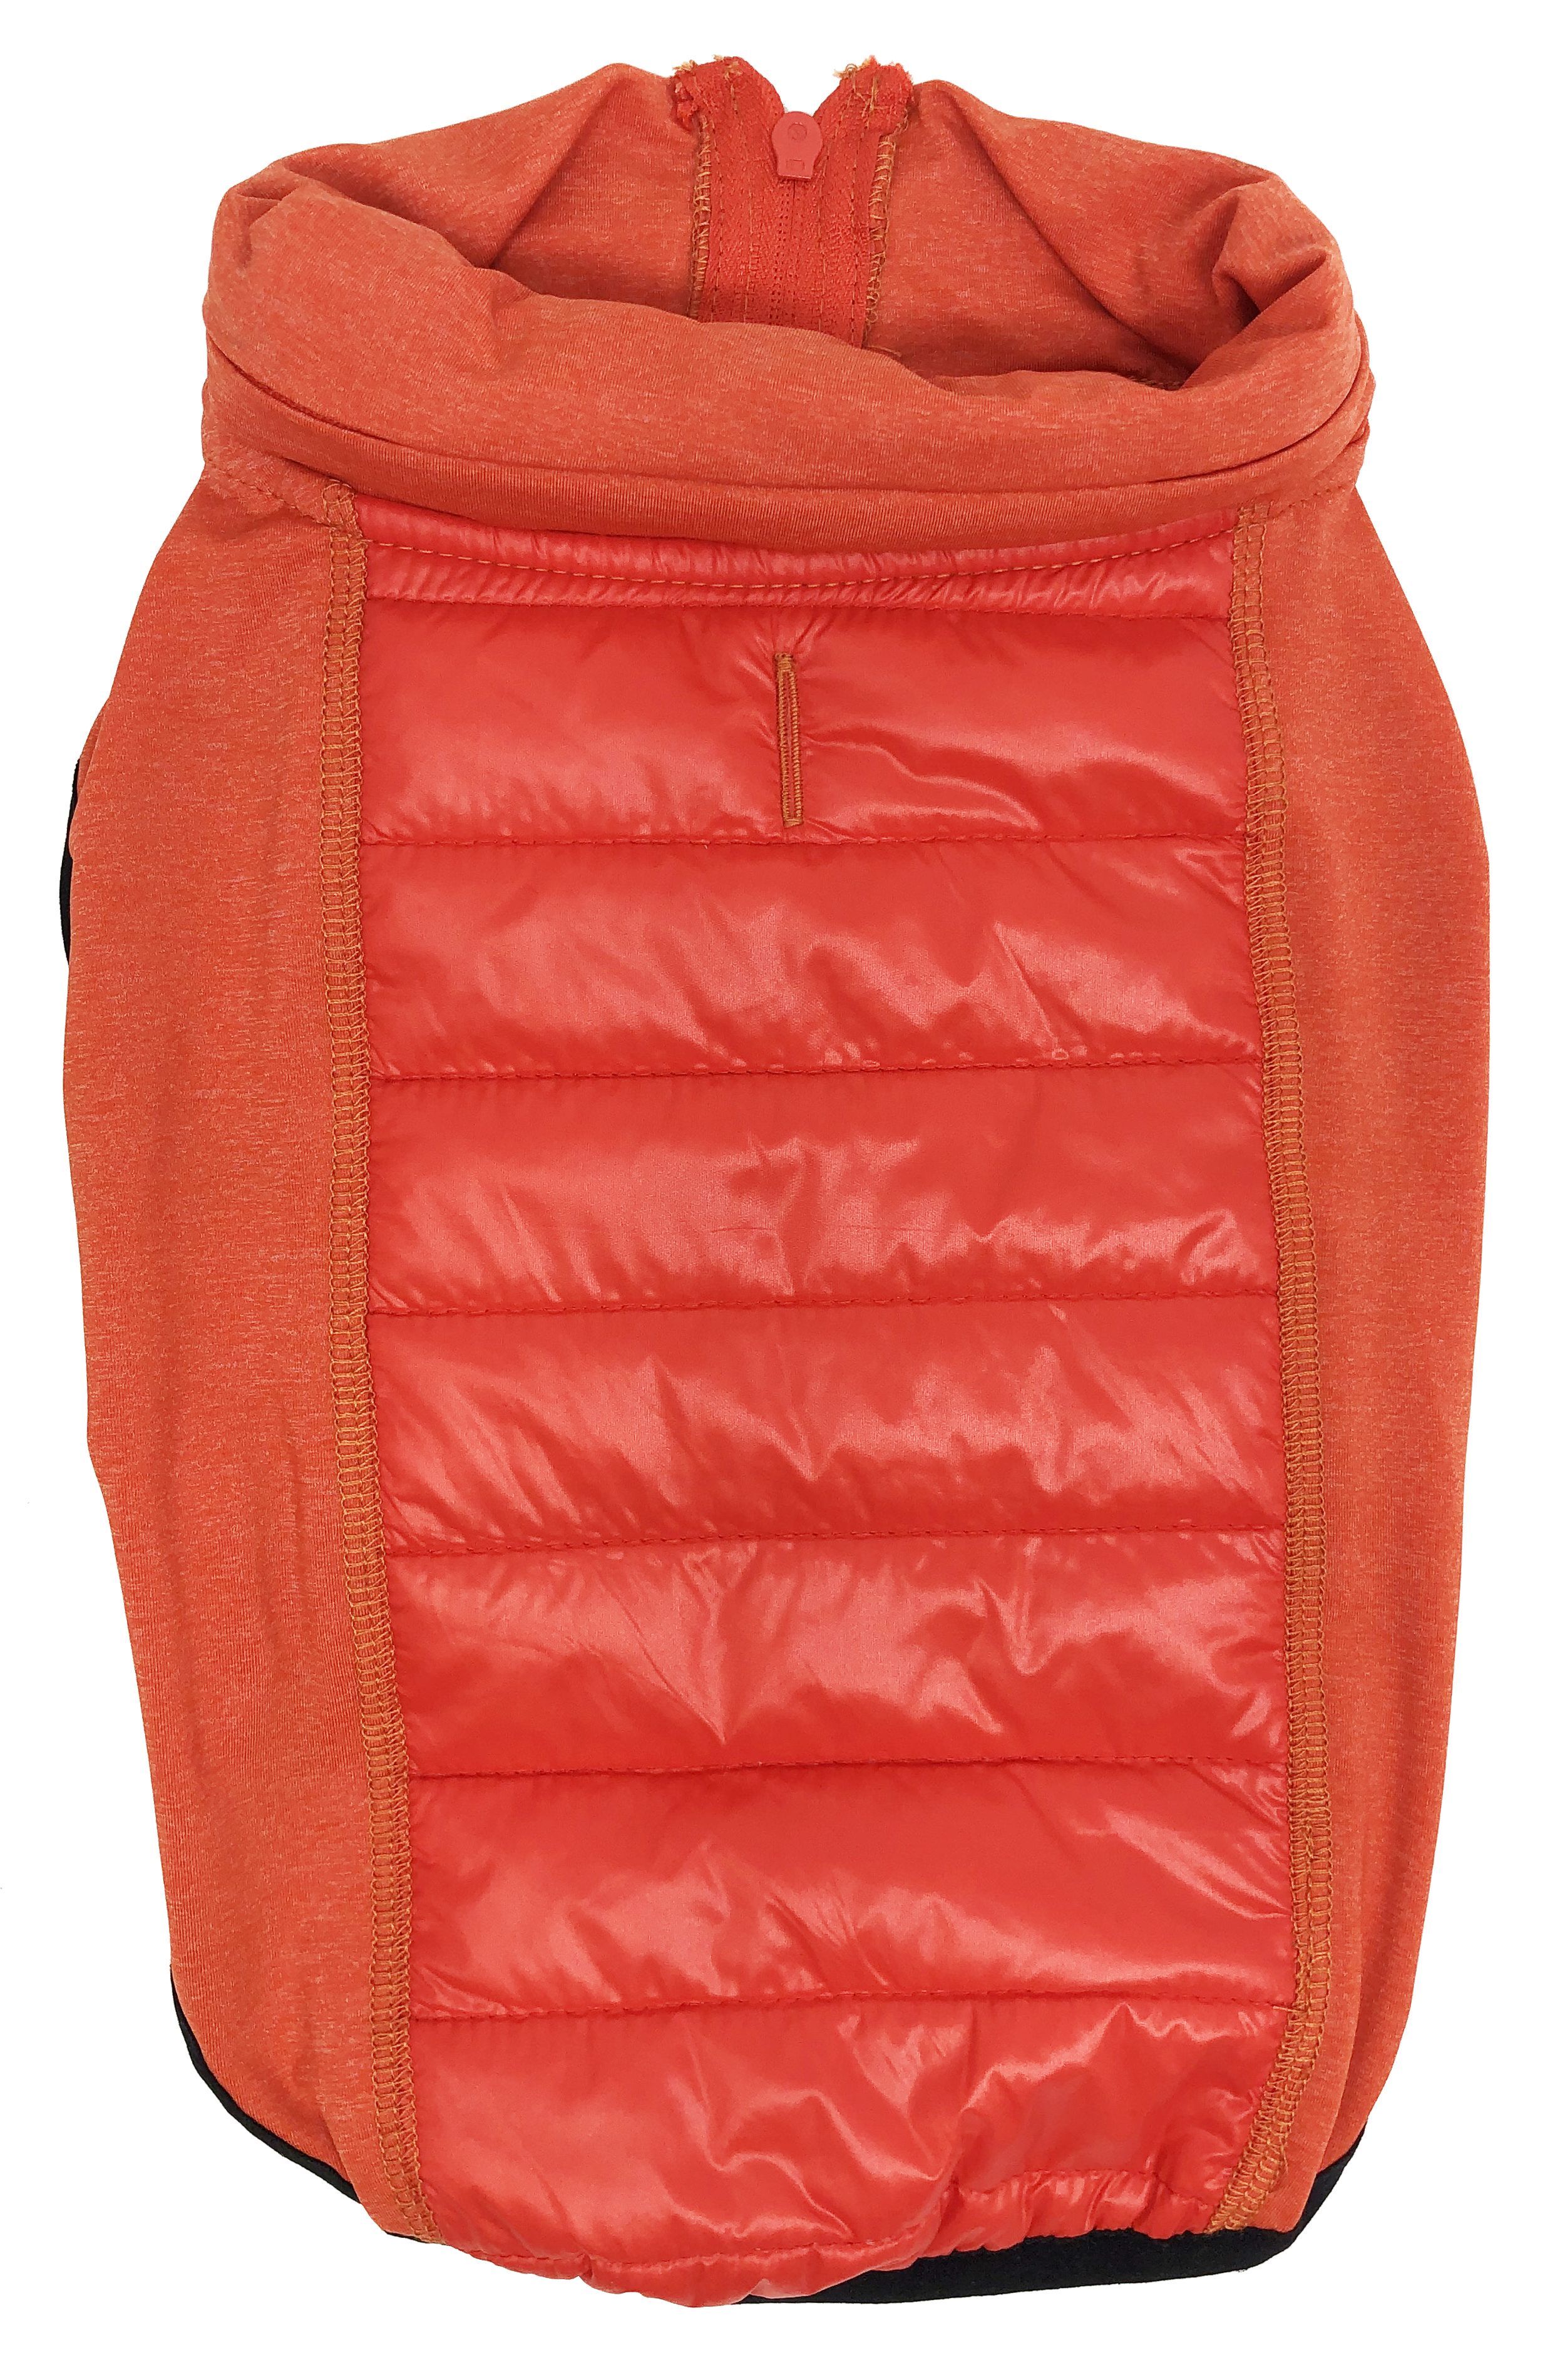 Pet Life ® 'Apex' Lightweight Hybrid 4-Season Stretch and Quick-Dry Dog Coat w/ Pop out Hood  